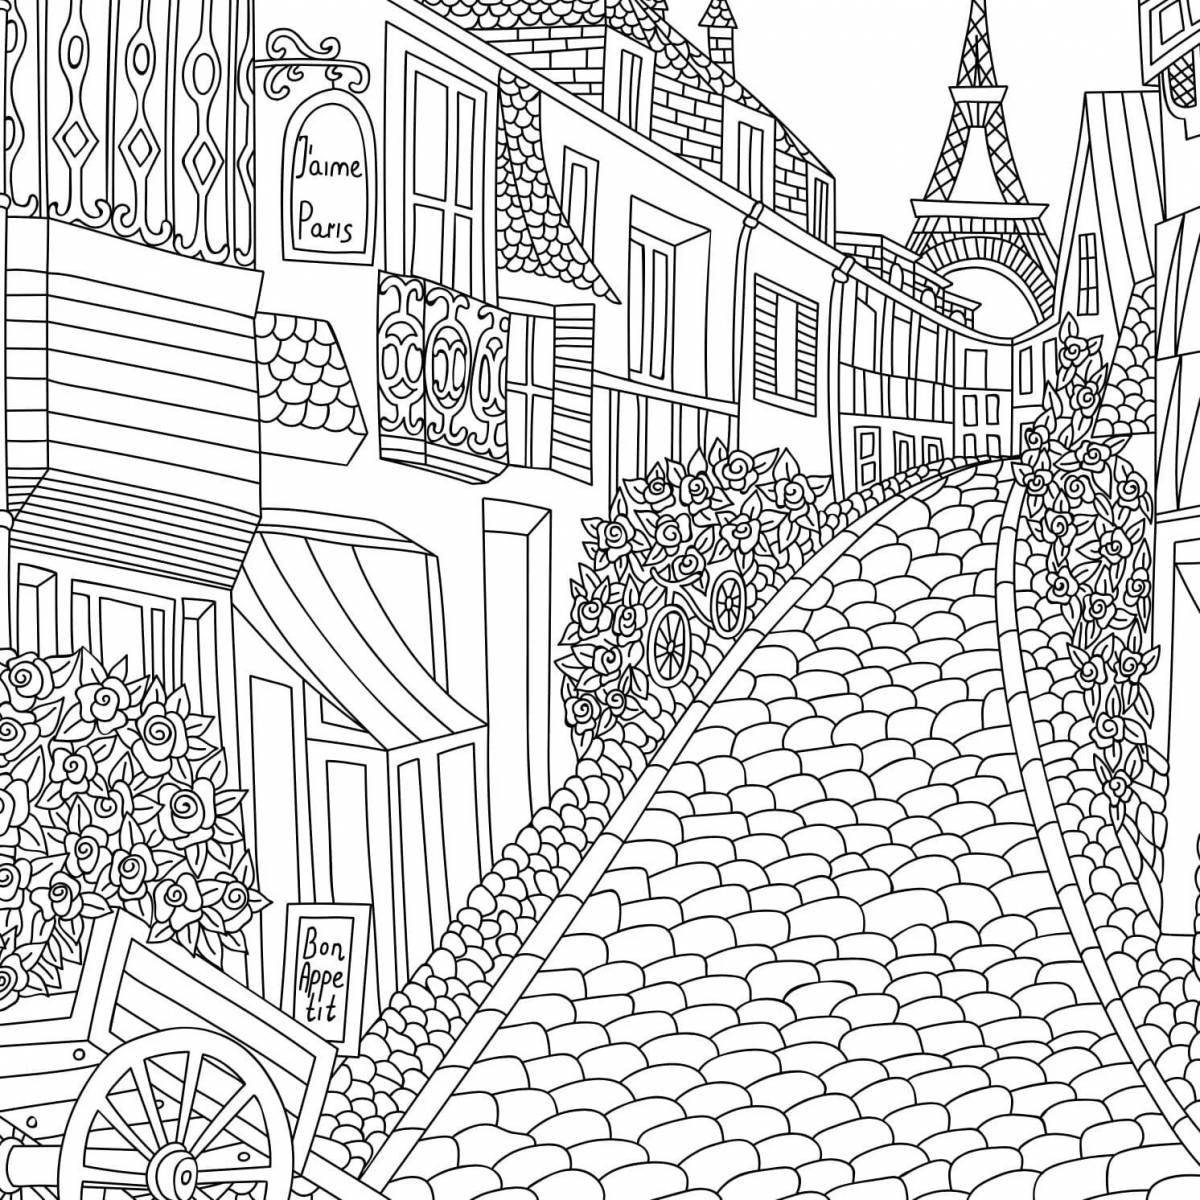 Coloring book nice city